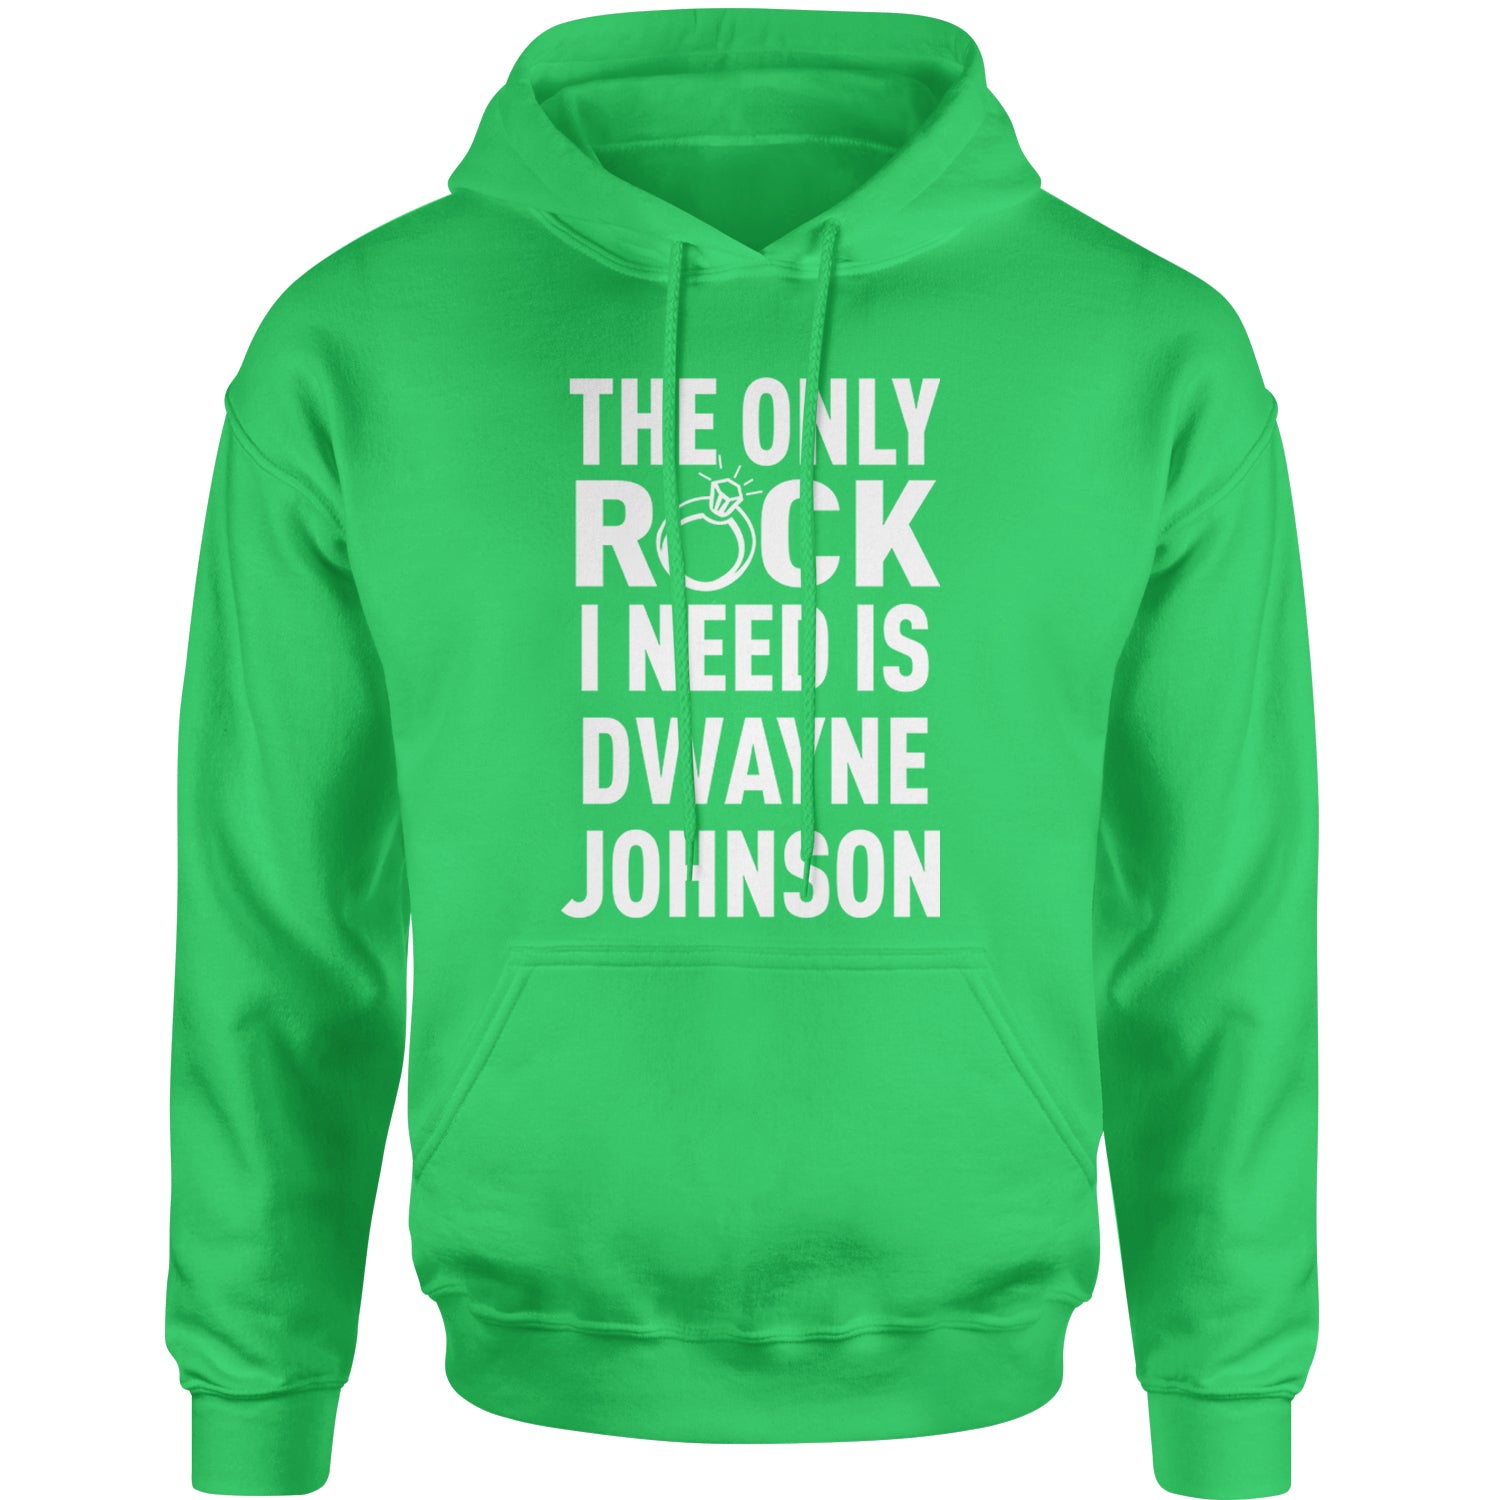 The Only Rock I Need Is Dwayne Johnson Adult Hoodie Sweatshirt dwayne, johnson, marry, me, ring, rock, the, wedding by Expression Tees